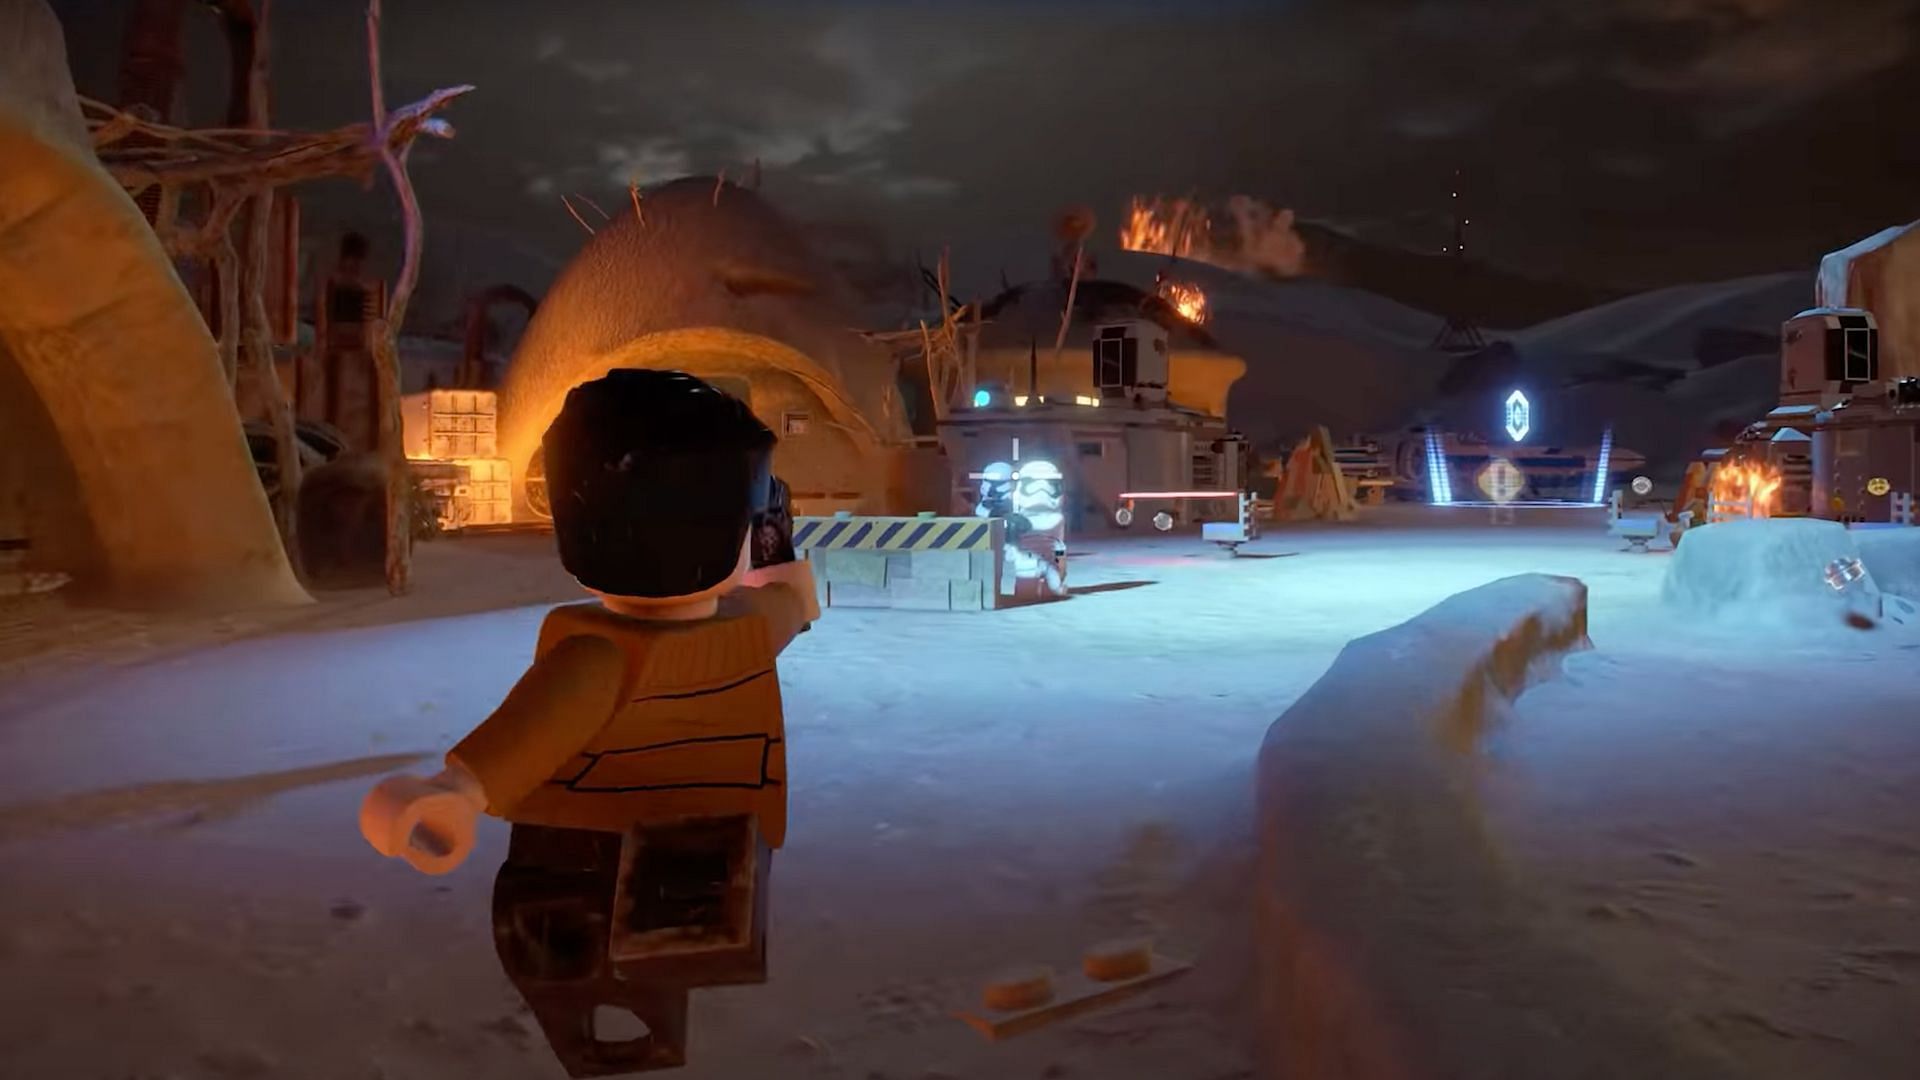 Players of Lego Star Wars: The Skywalker Saga can earn the Datacard by making a few good grapples inside of the Echo Base located on the Planet Hoth (Image via Warner Brothers)